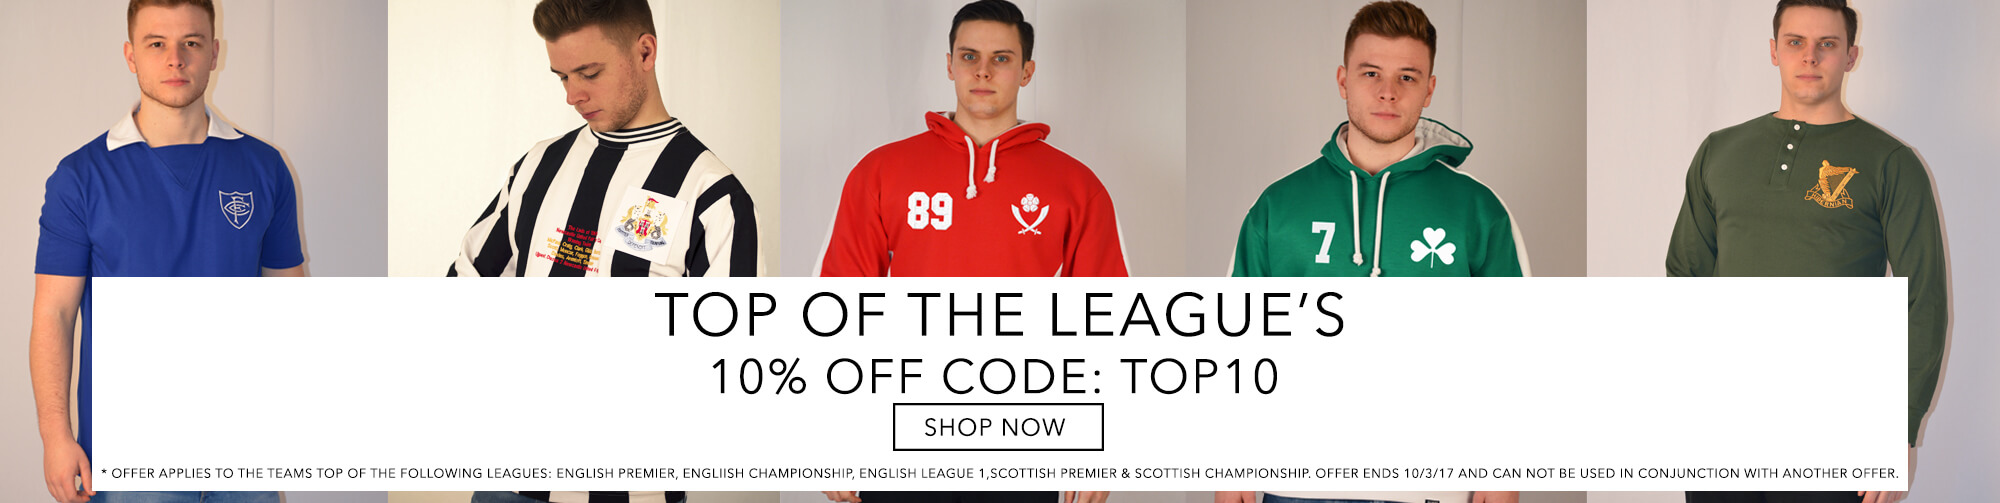 Toffs Retro: 10% off top of the league's stuff